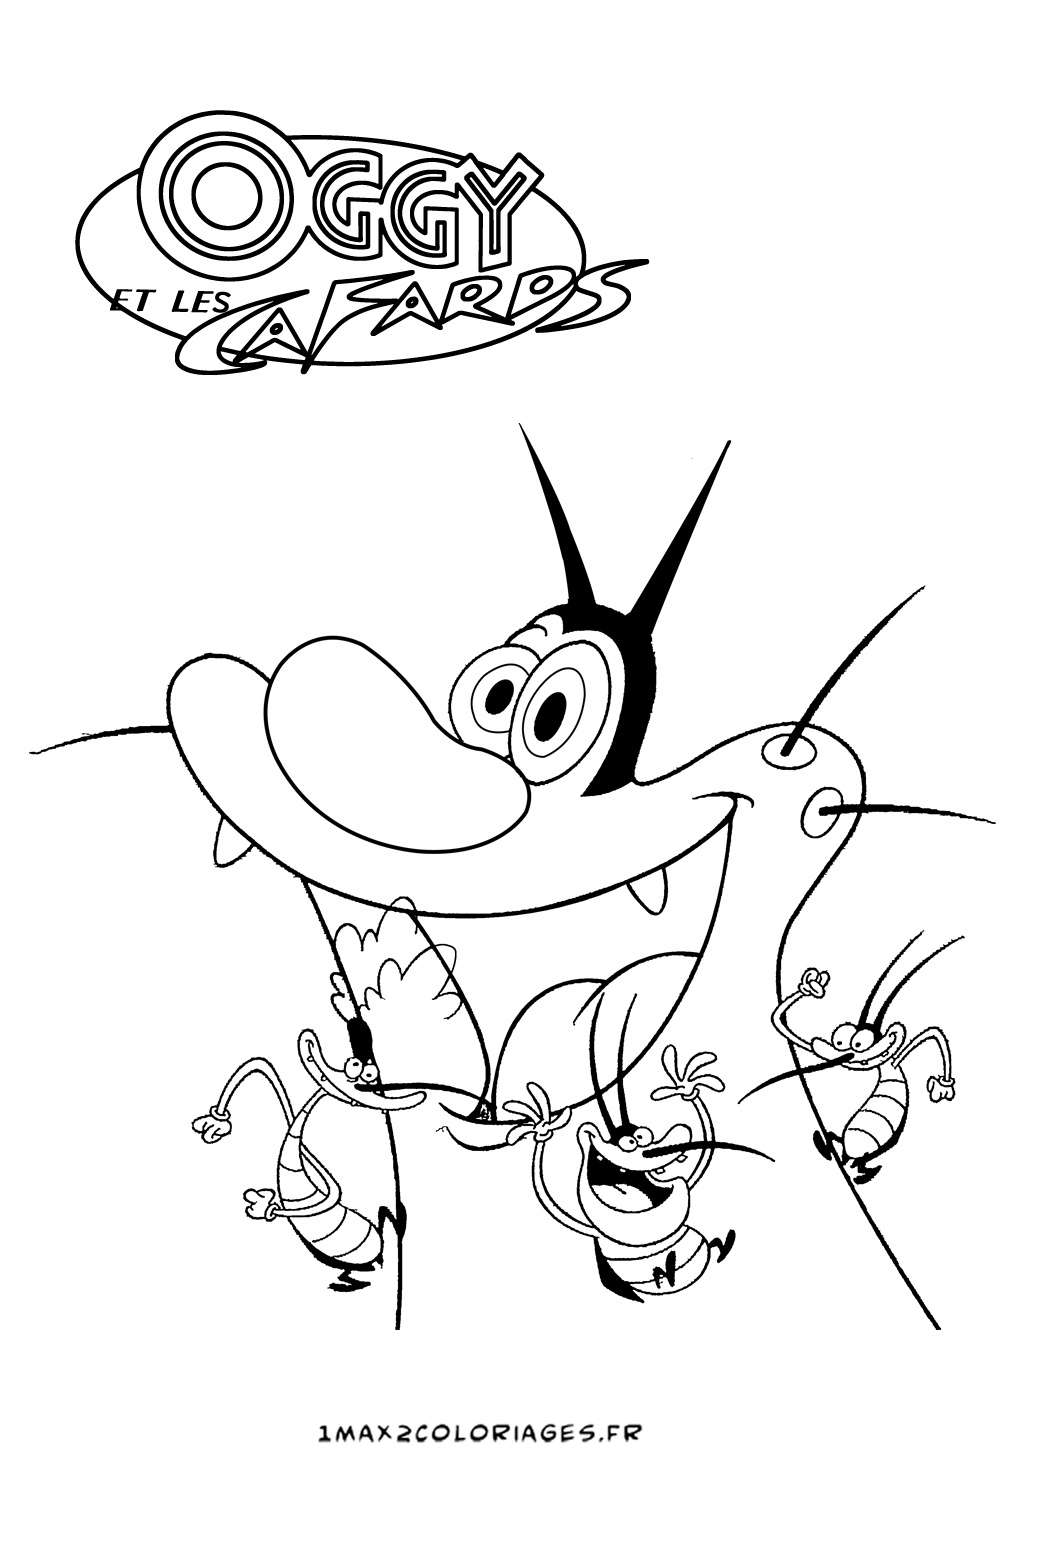 oggy and olivia coloring pages - photo #25